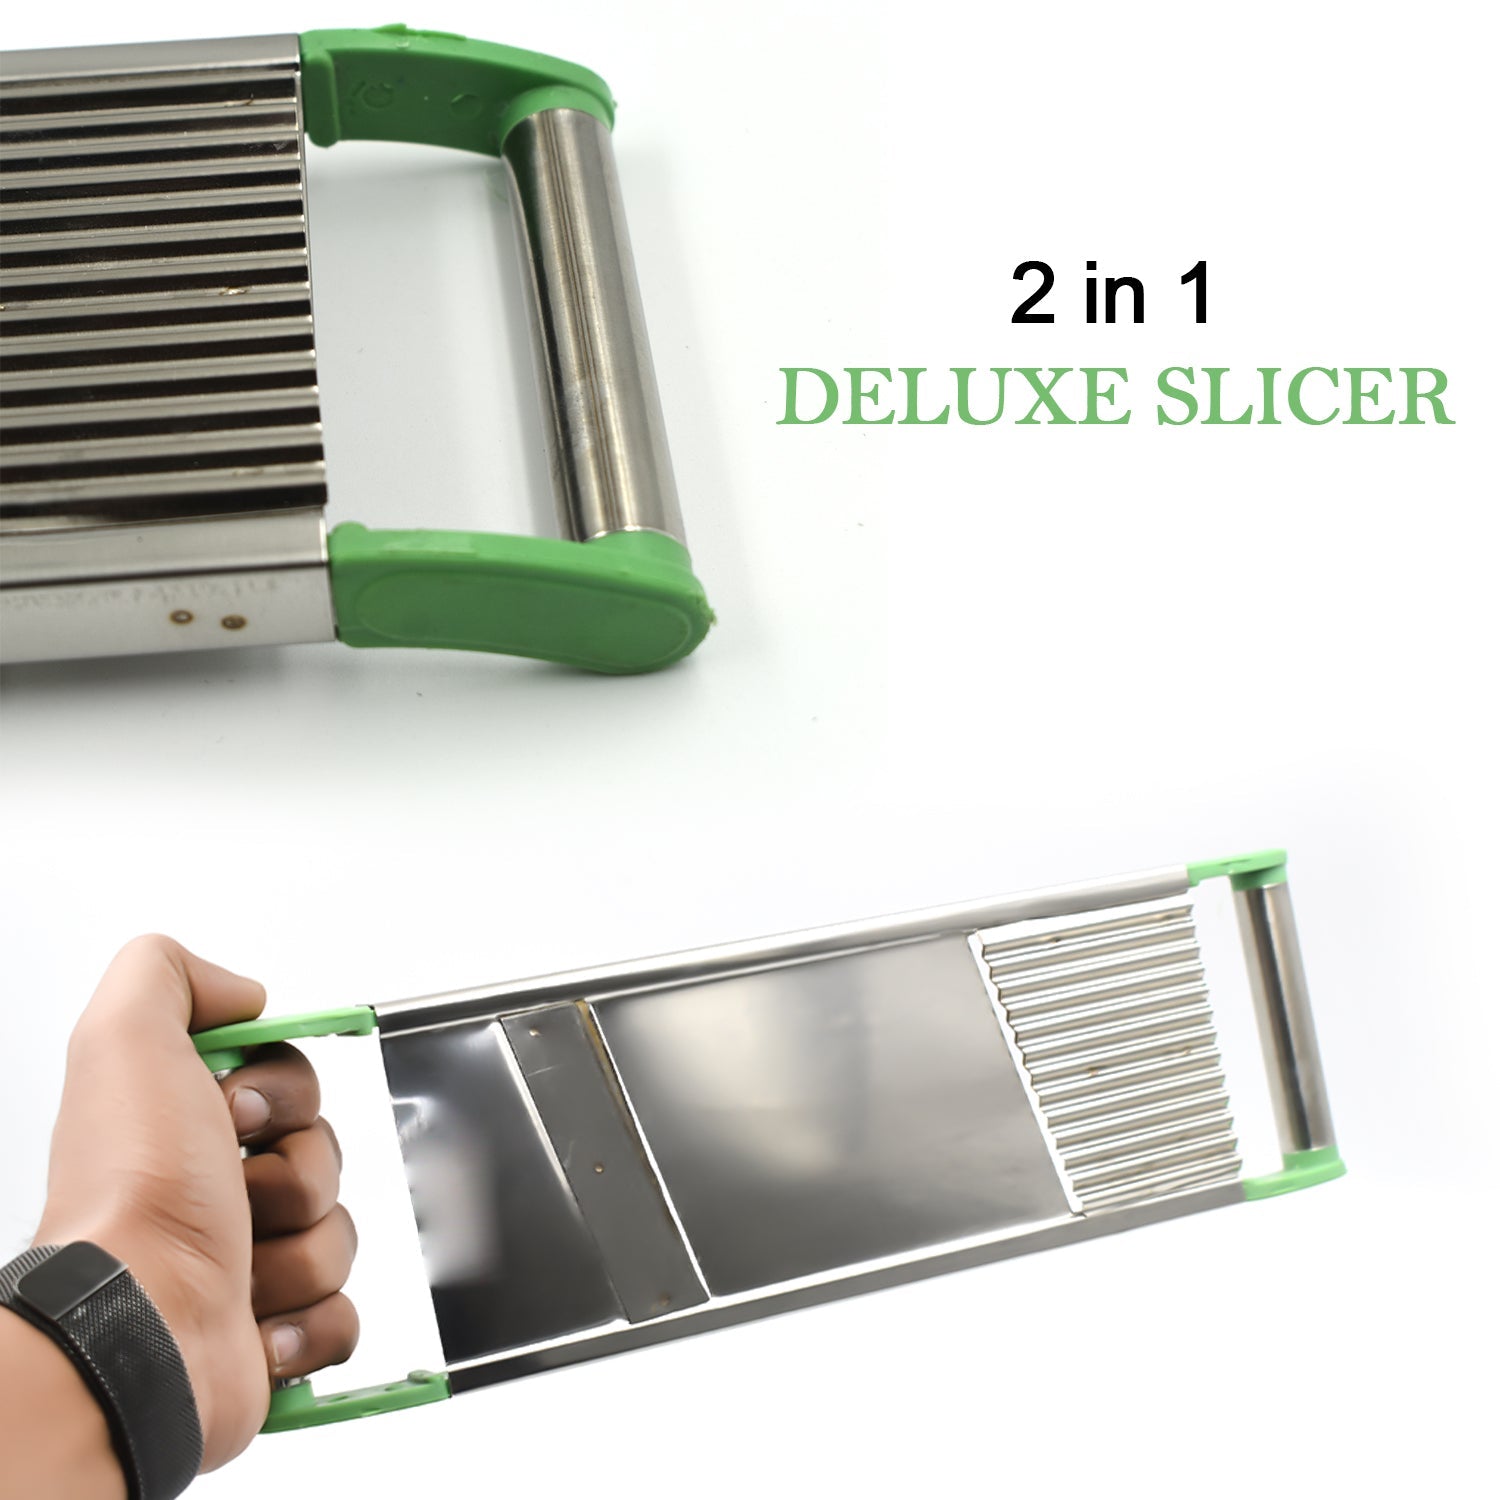 2688 2 in 1 Potato Slicer used in all kinds of household kitchen purposes for cutting and slicing of potatoes.